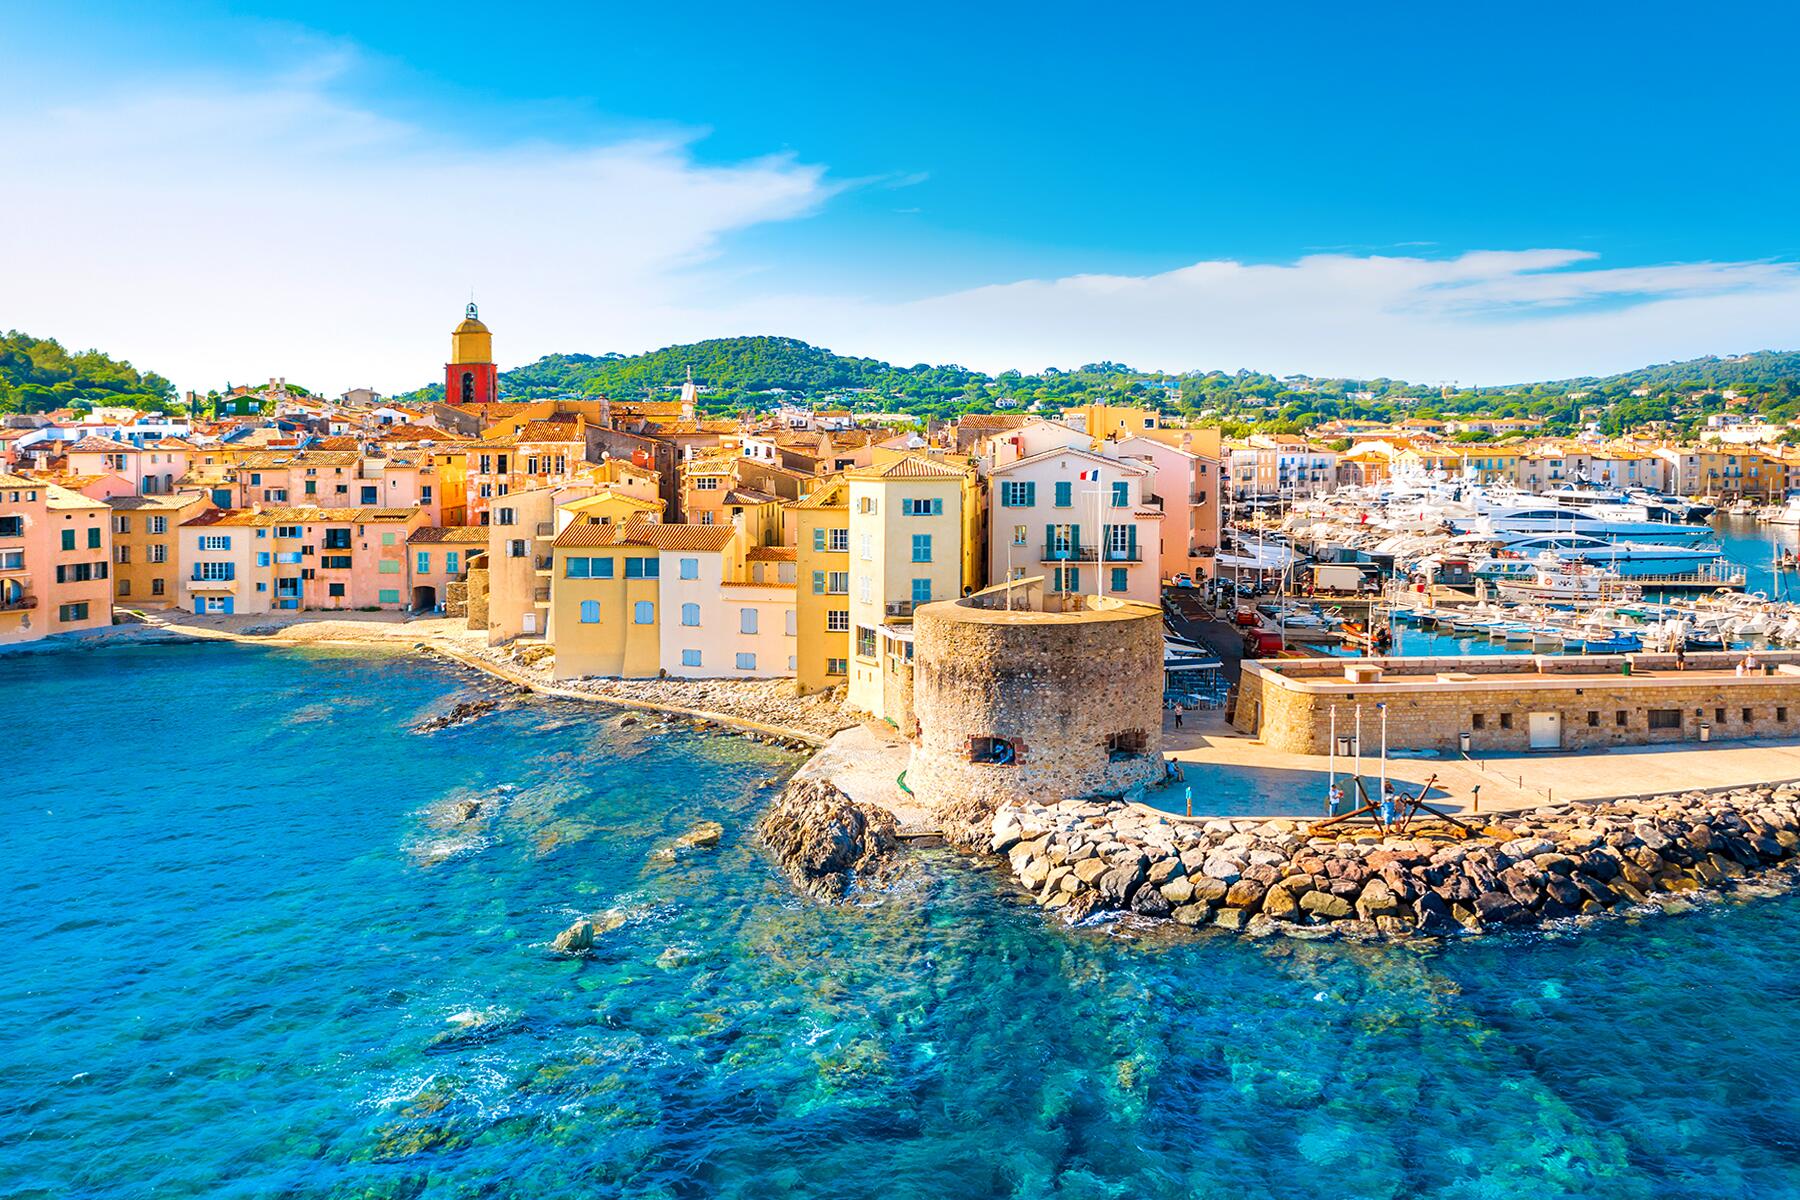 <a href='https://www.fodors.com/world/europe/france/the-french-riviera/experiences/news/photos/locals-guide-to-the-french-riviera-from-saint-tropez-to-menton-france#'>From &quot;The French Riviera Can Be Intimidating. Here's How to Experience It Like a Local: Hidden Coves and Beaches&quot;</a>